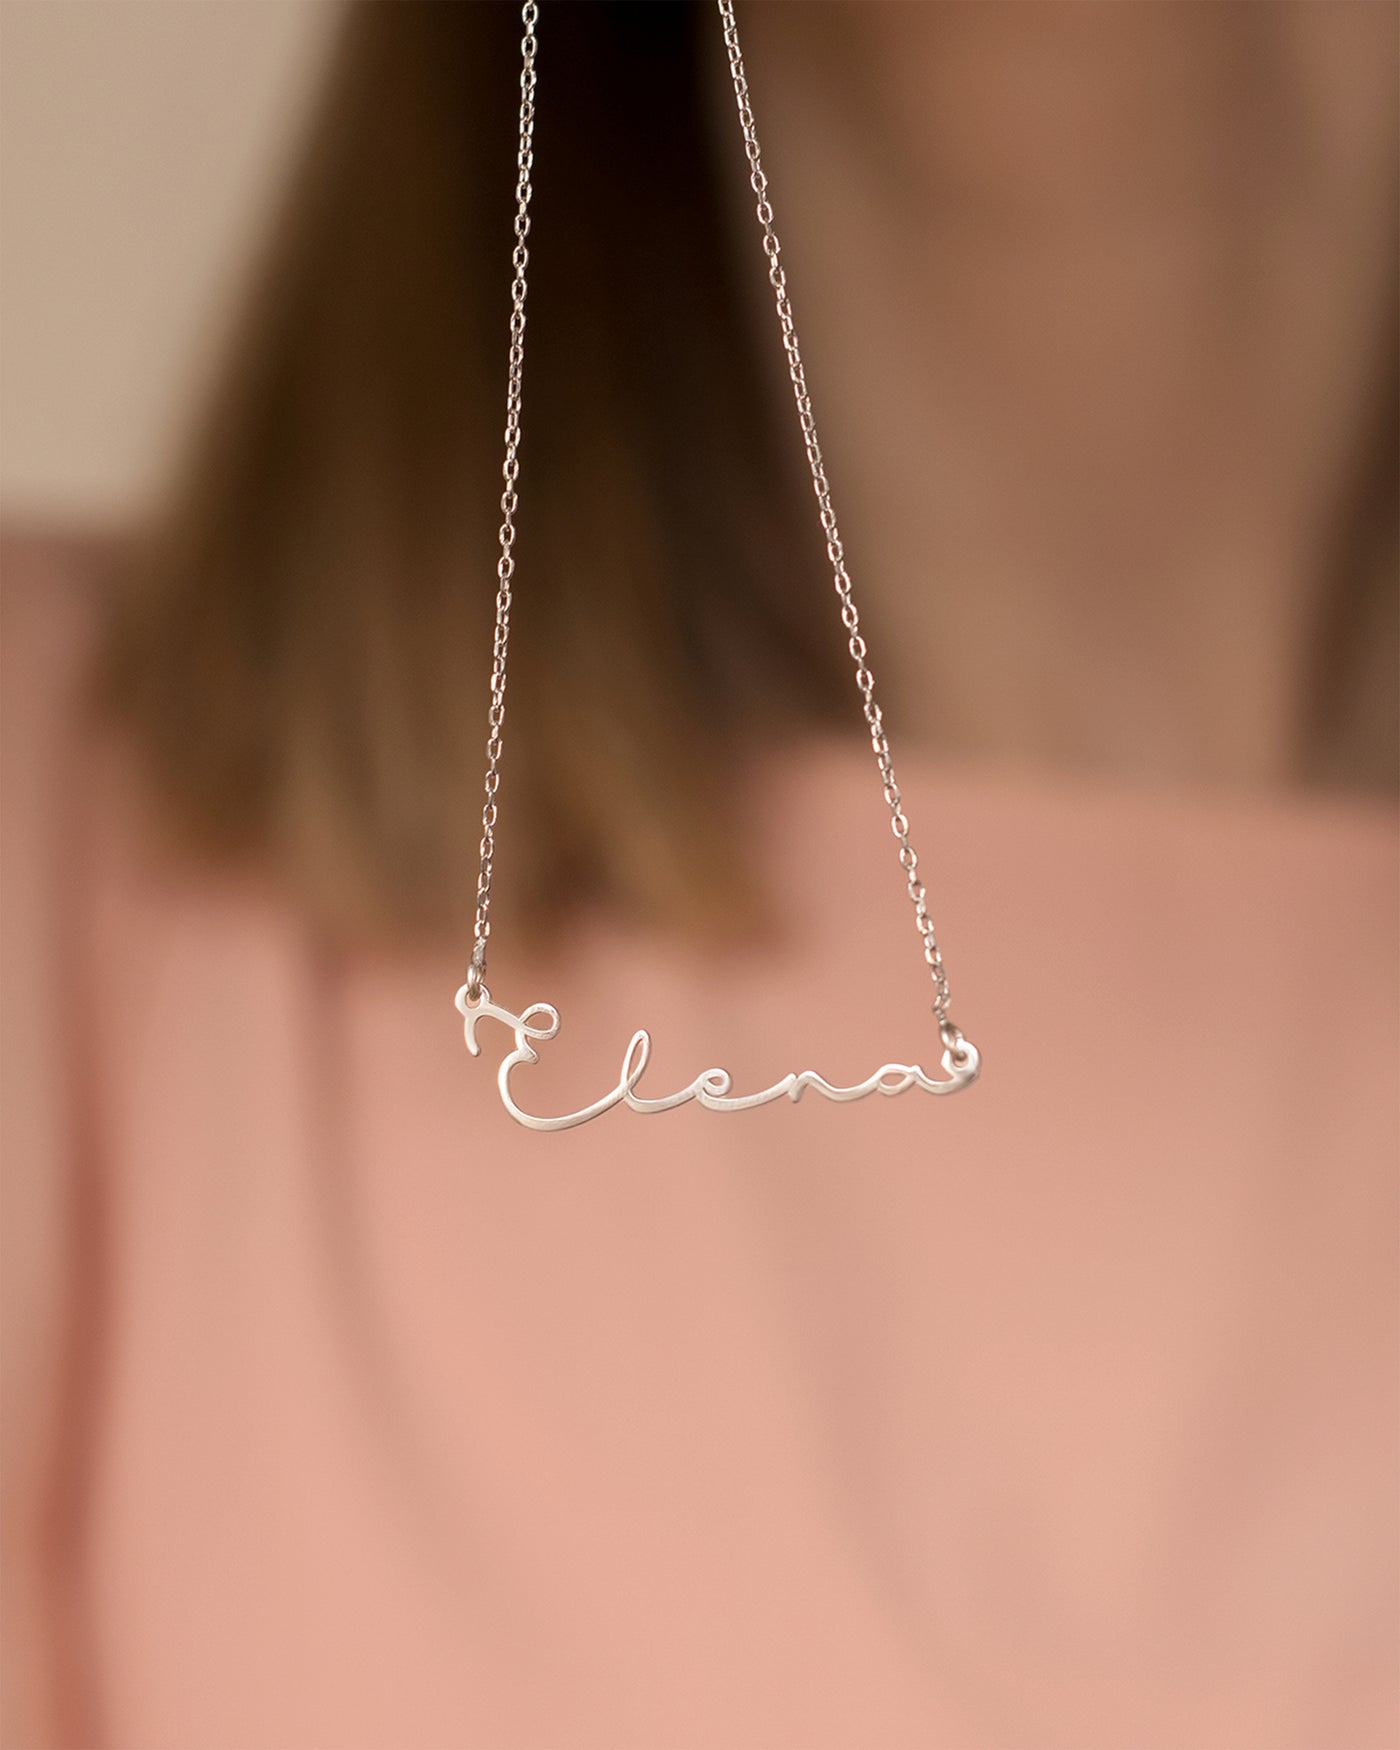 Name necklace - variant Emily